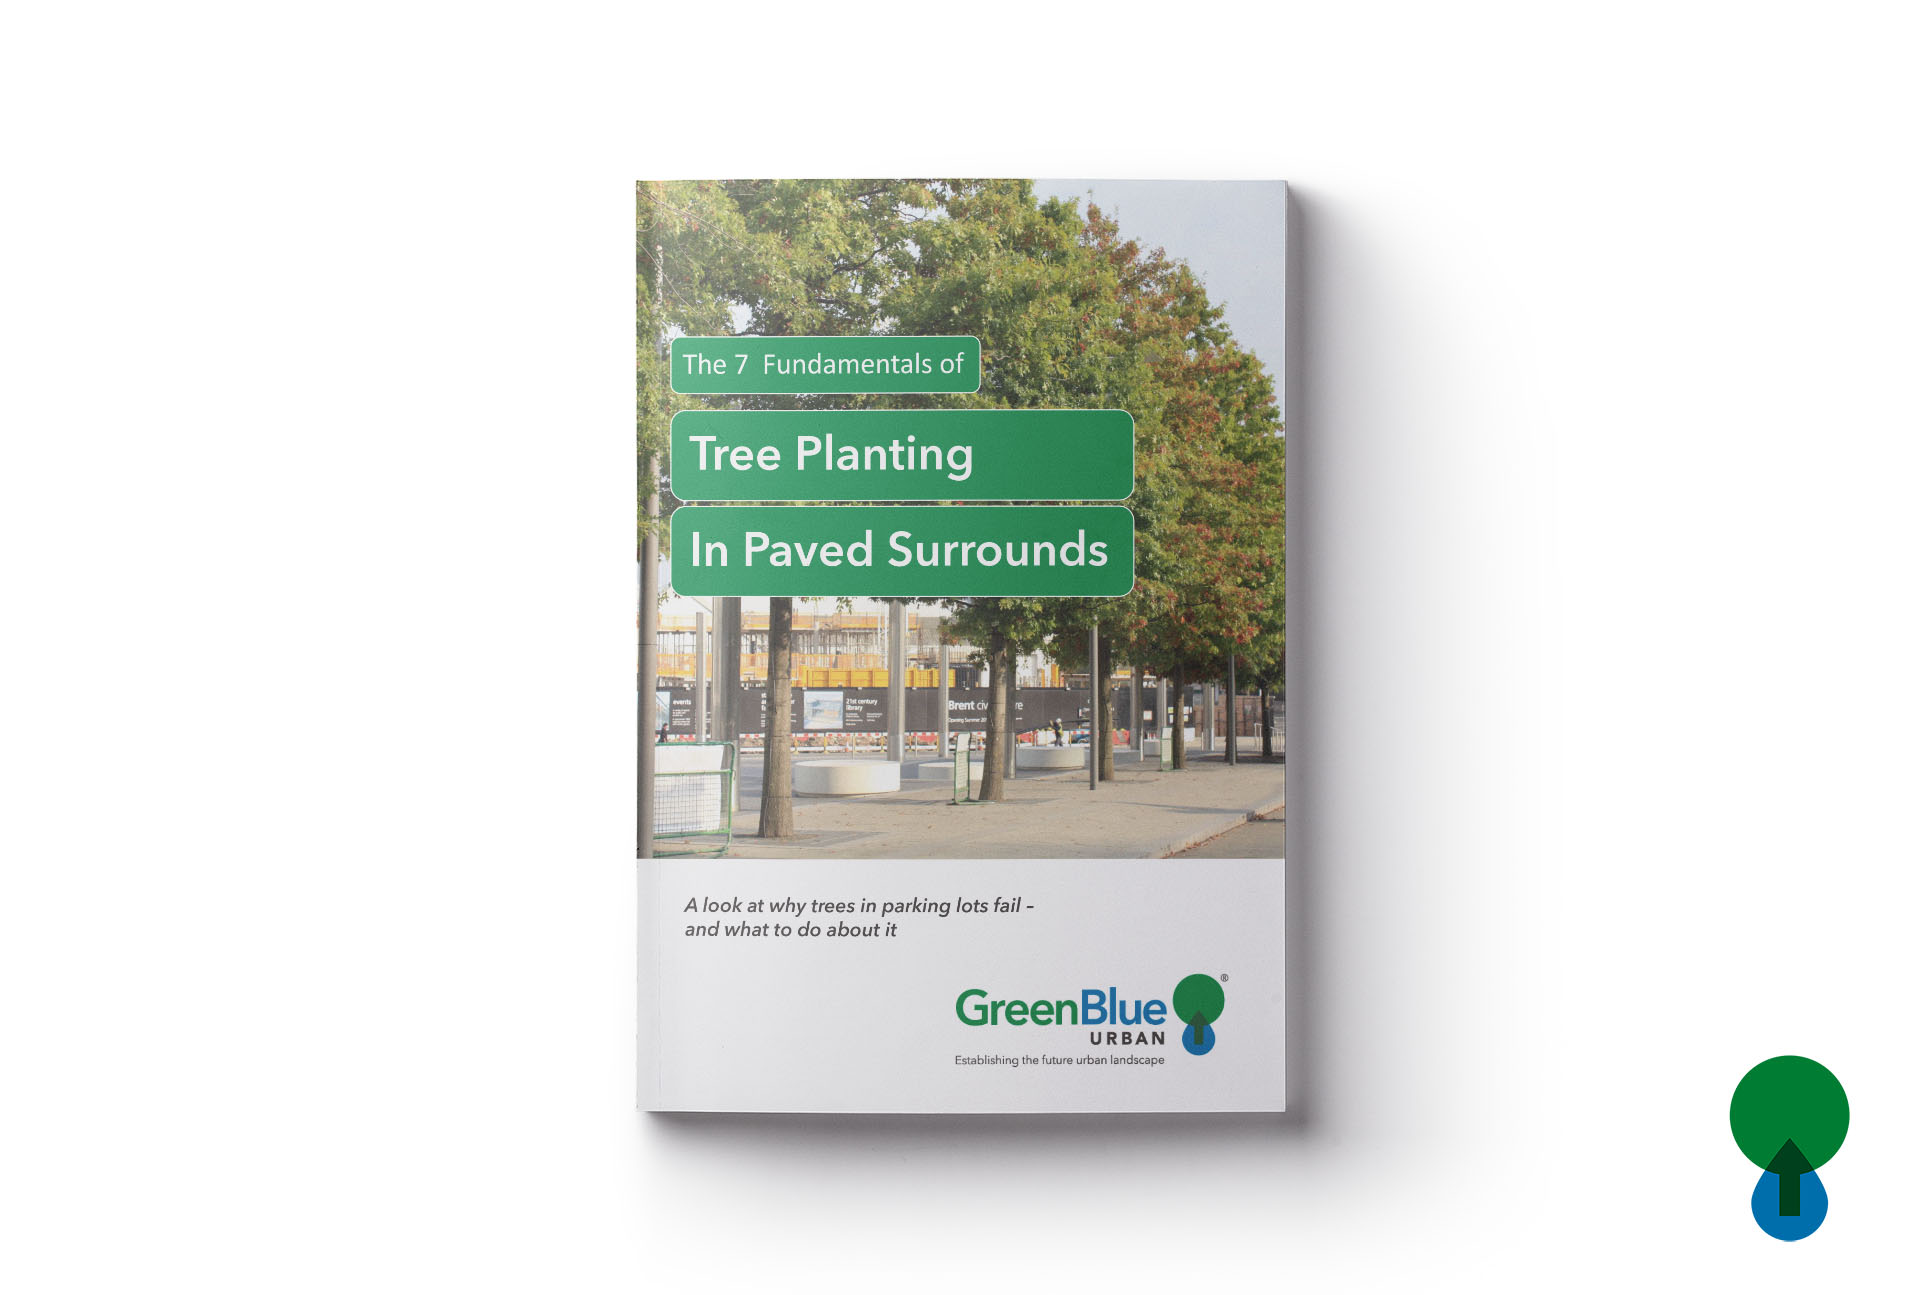 The 7 Fundamentals of Tree Planting in Paved Surrounds